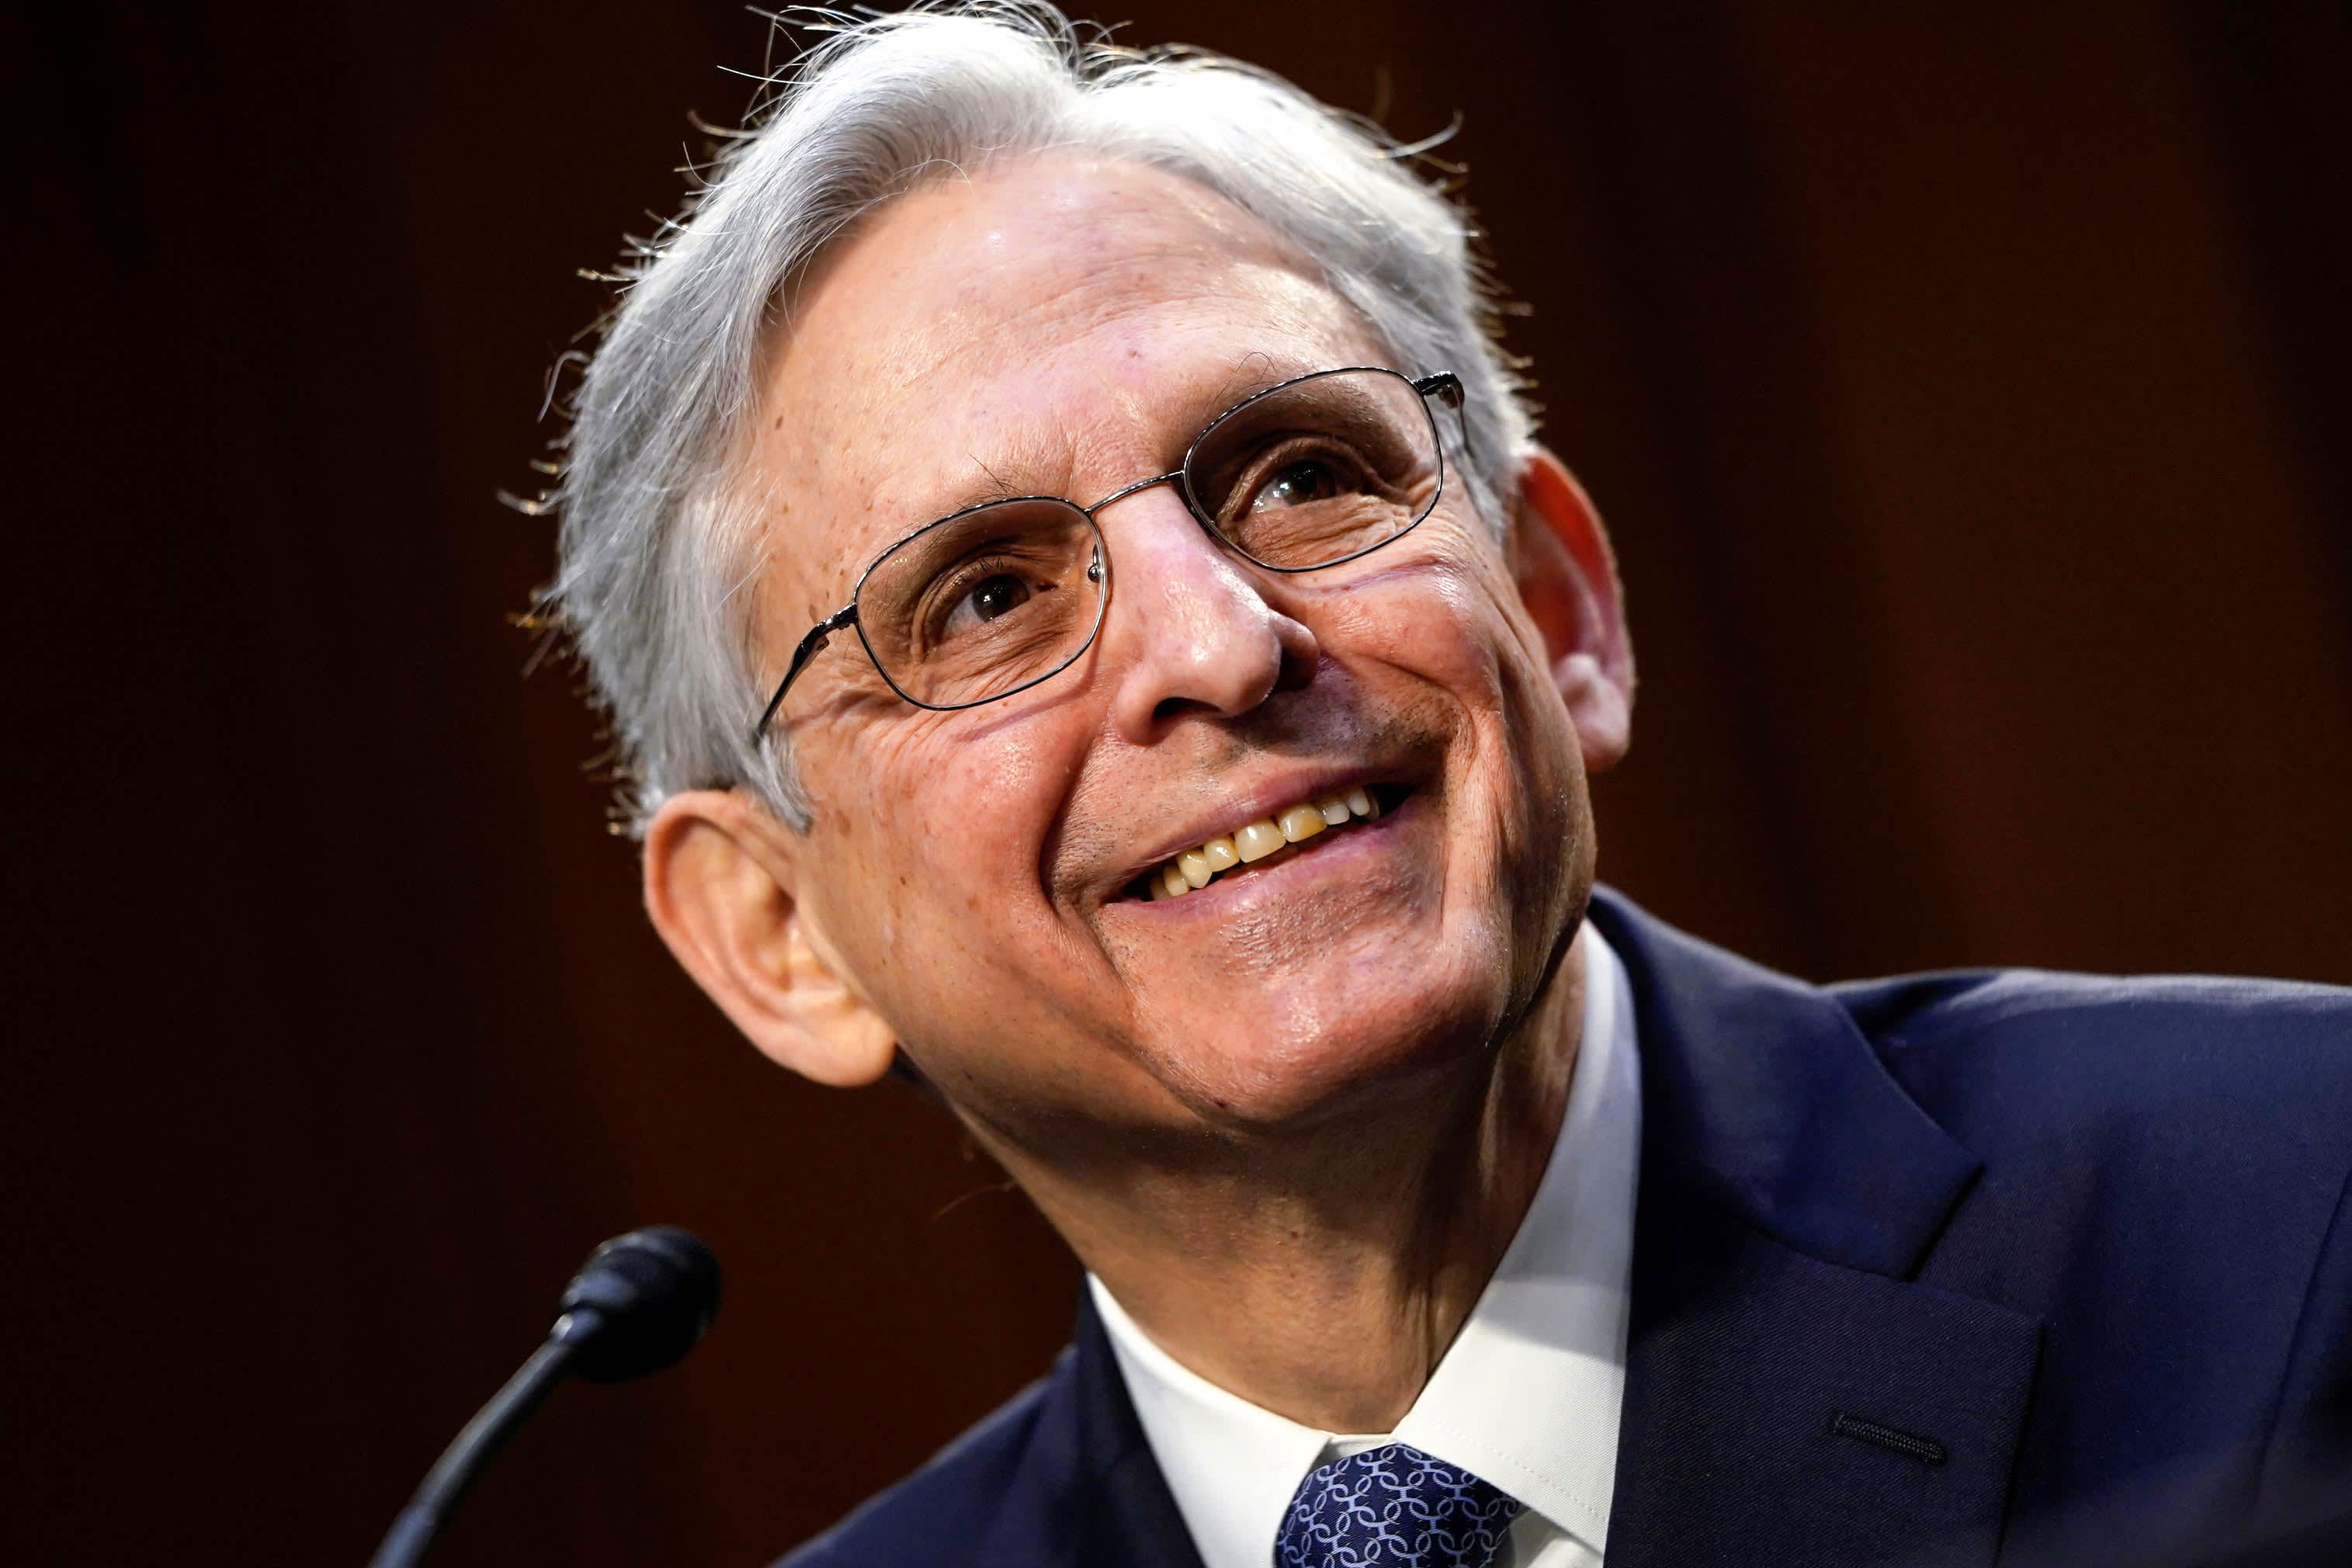 Merrick Garland confirmed as US Attorney General by the Senate